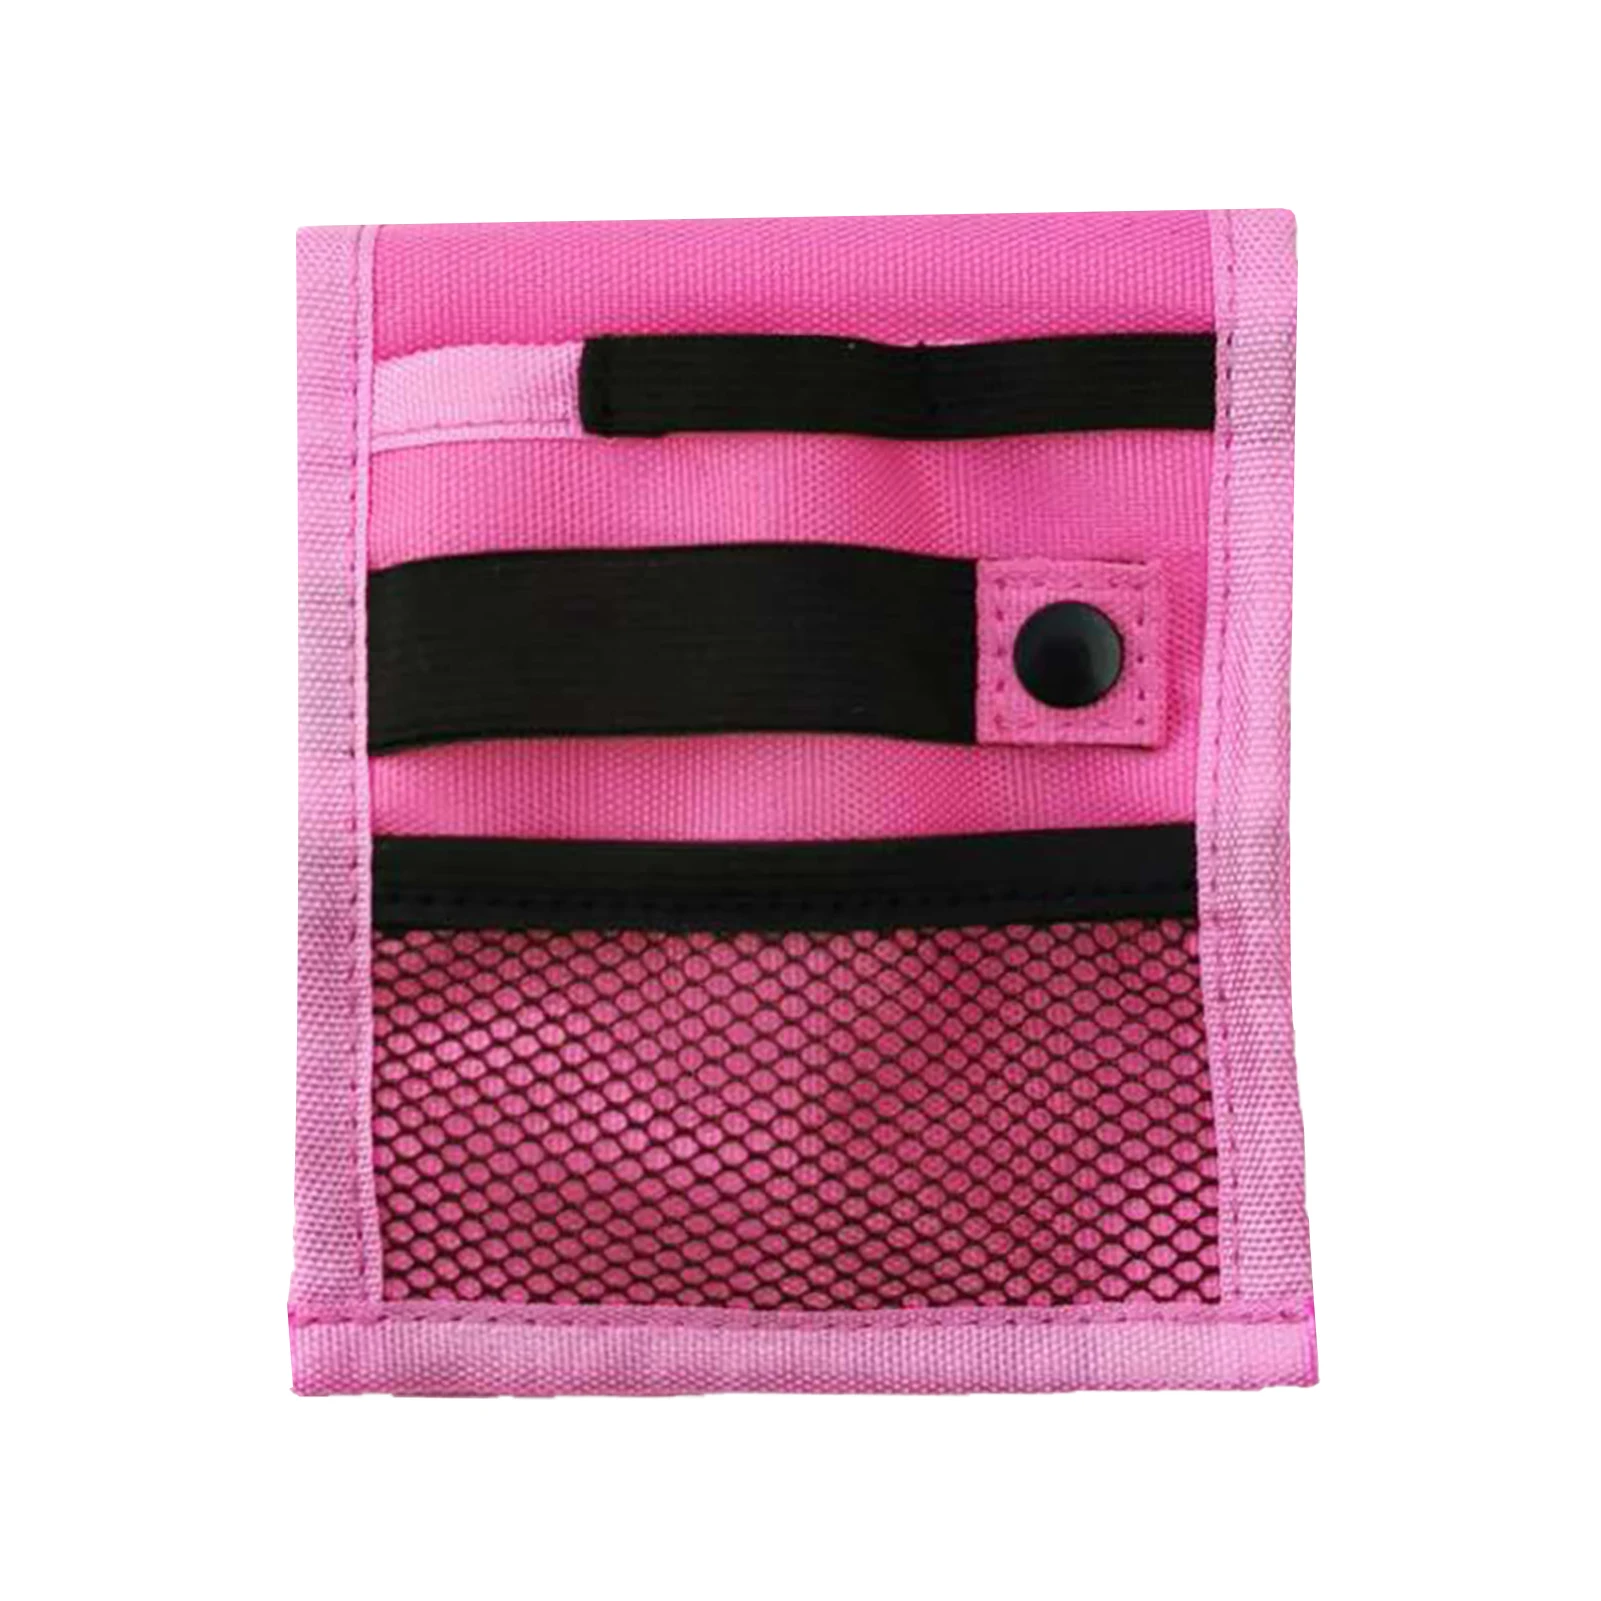 

Inserted Holder School Practical Multipurpose Tools Storage Pouch Protective Pen Bag Portable Durable Oxford Cloth Chest Office